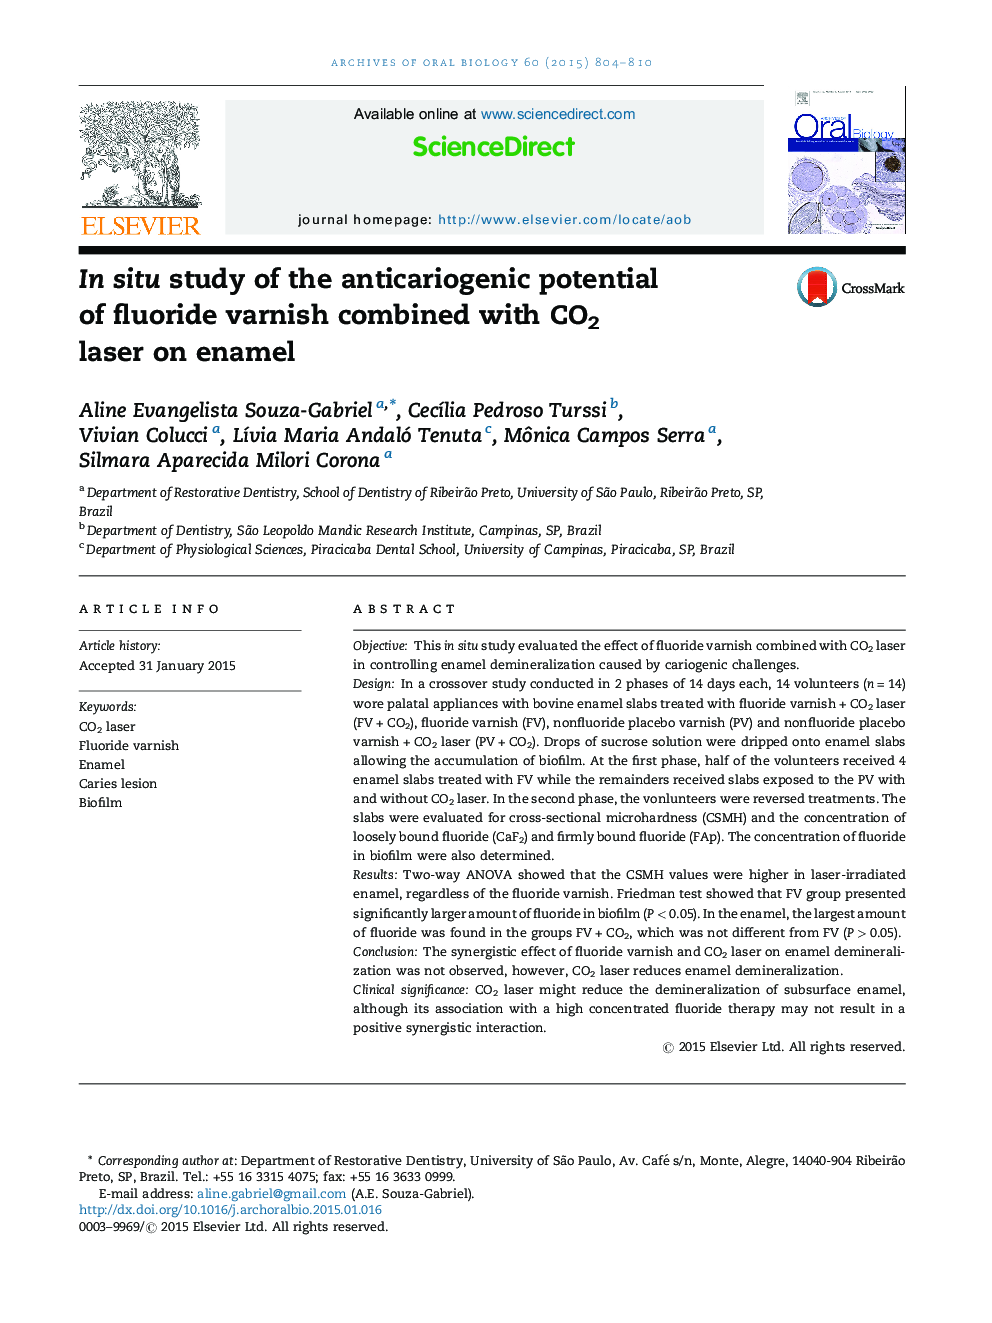 In situ study of the anticariogenic potential of fluoride varnish combined with CO2 laser on enamel